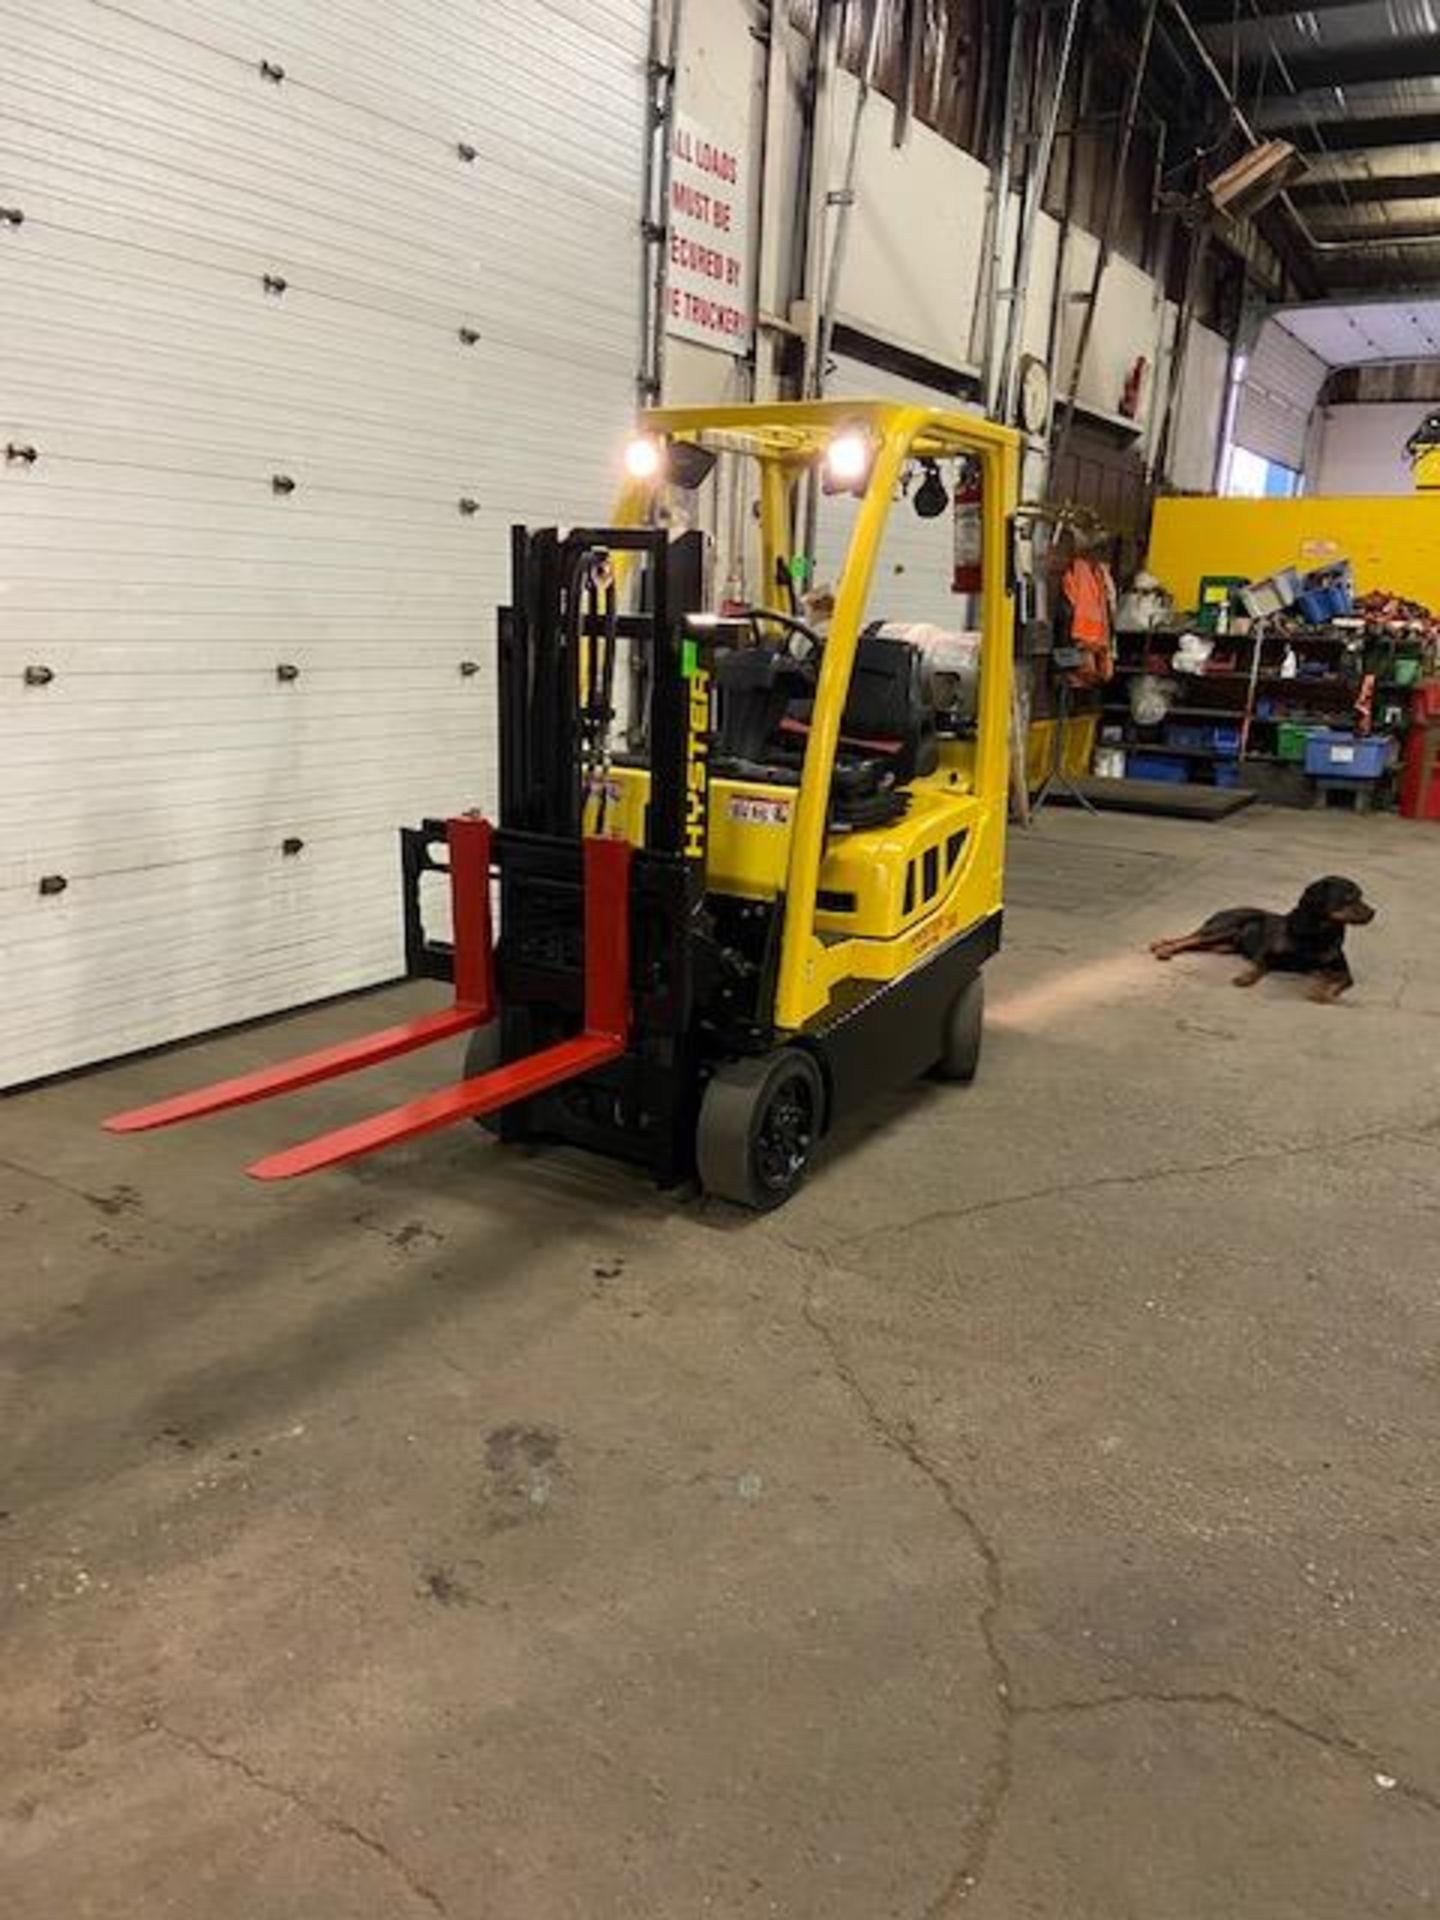 FREE CUSTOMS - 2015 Hyster 3000lbs Capacity Forklift LPG (propane) with sideshift LOW HOURS (no - Image 2 of 3